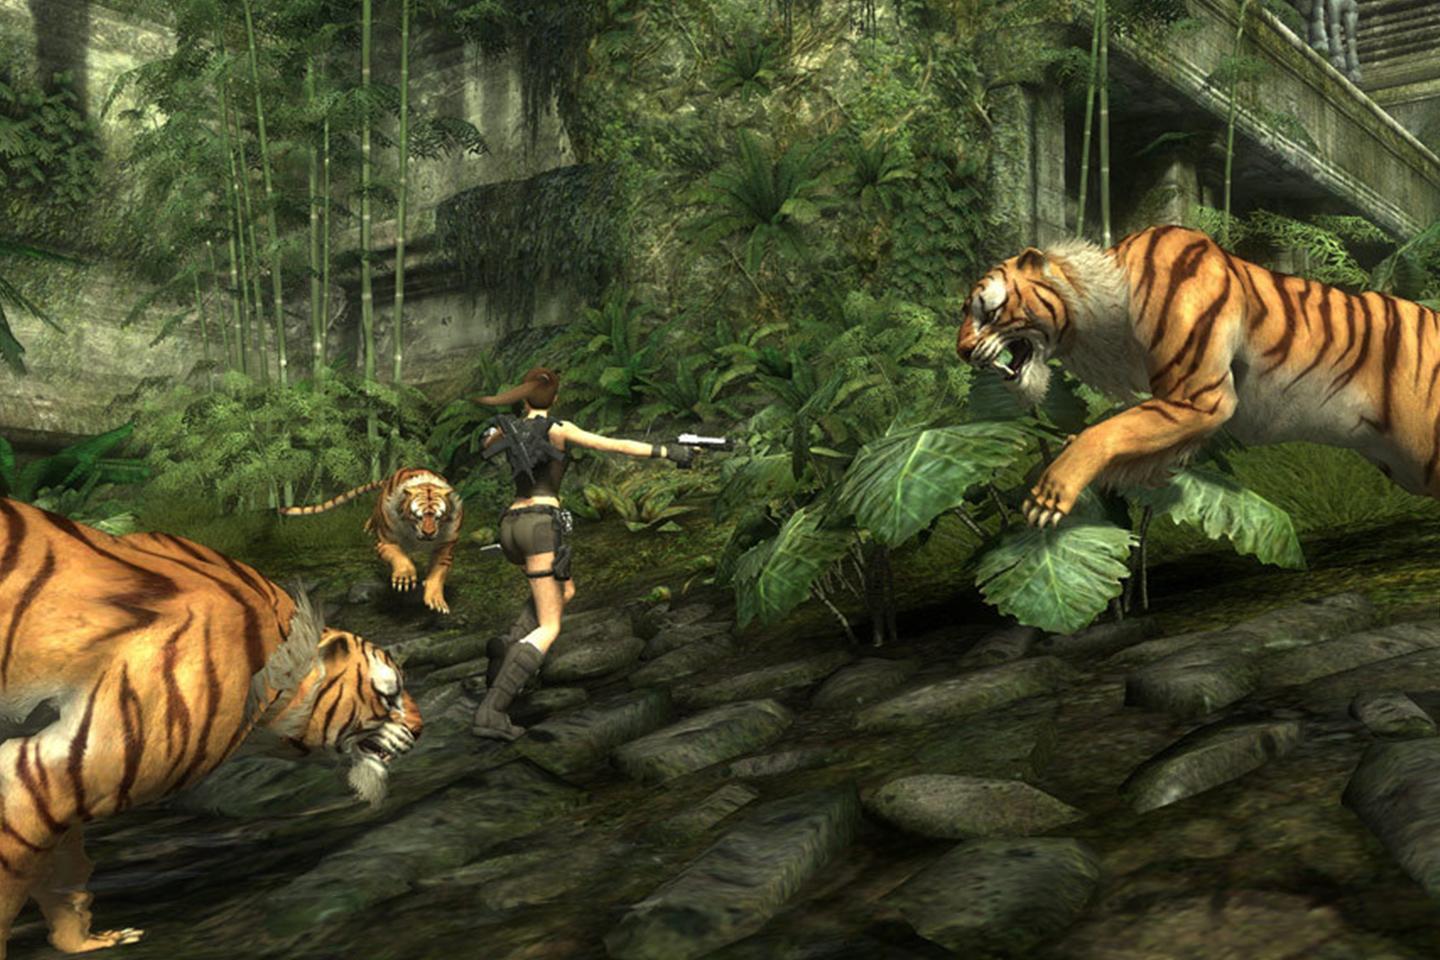 Lara surrounded by three tigers in green, mossy forest.